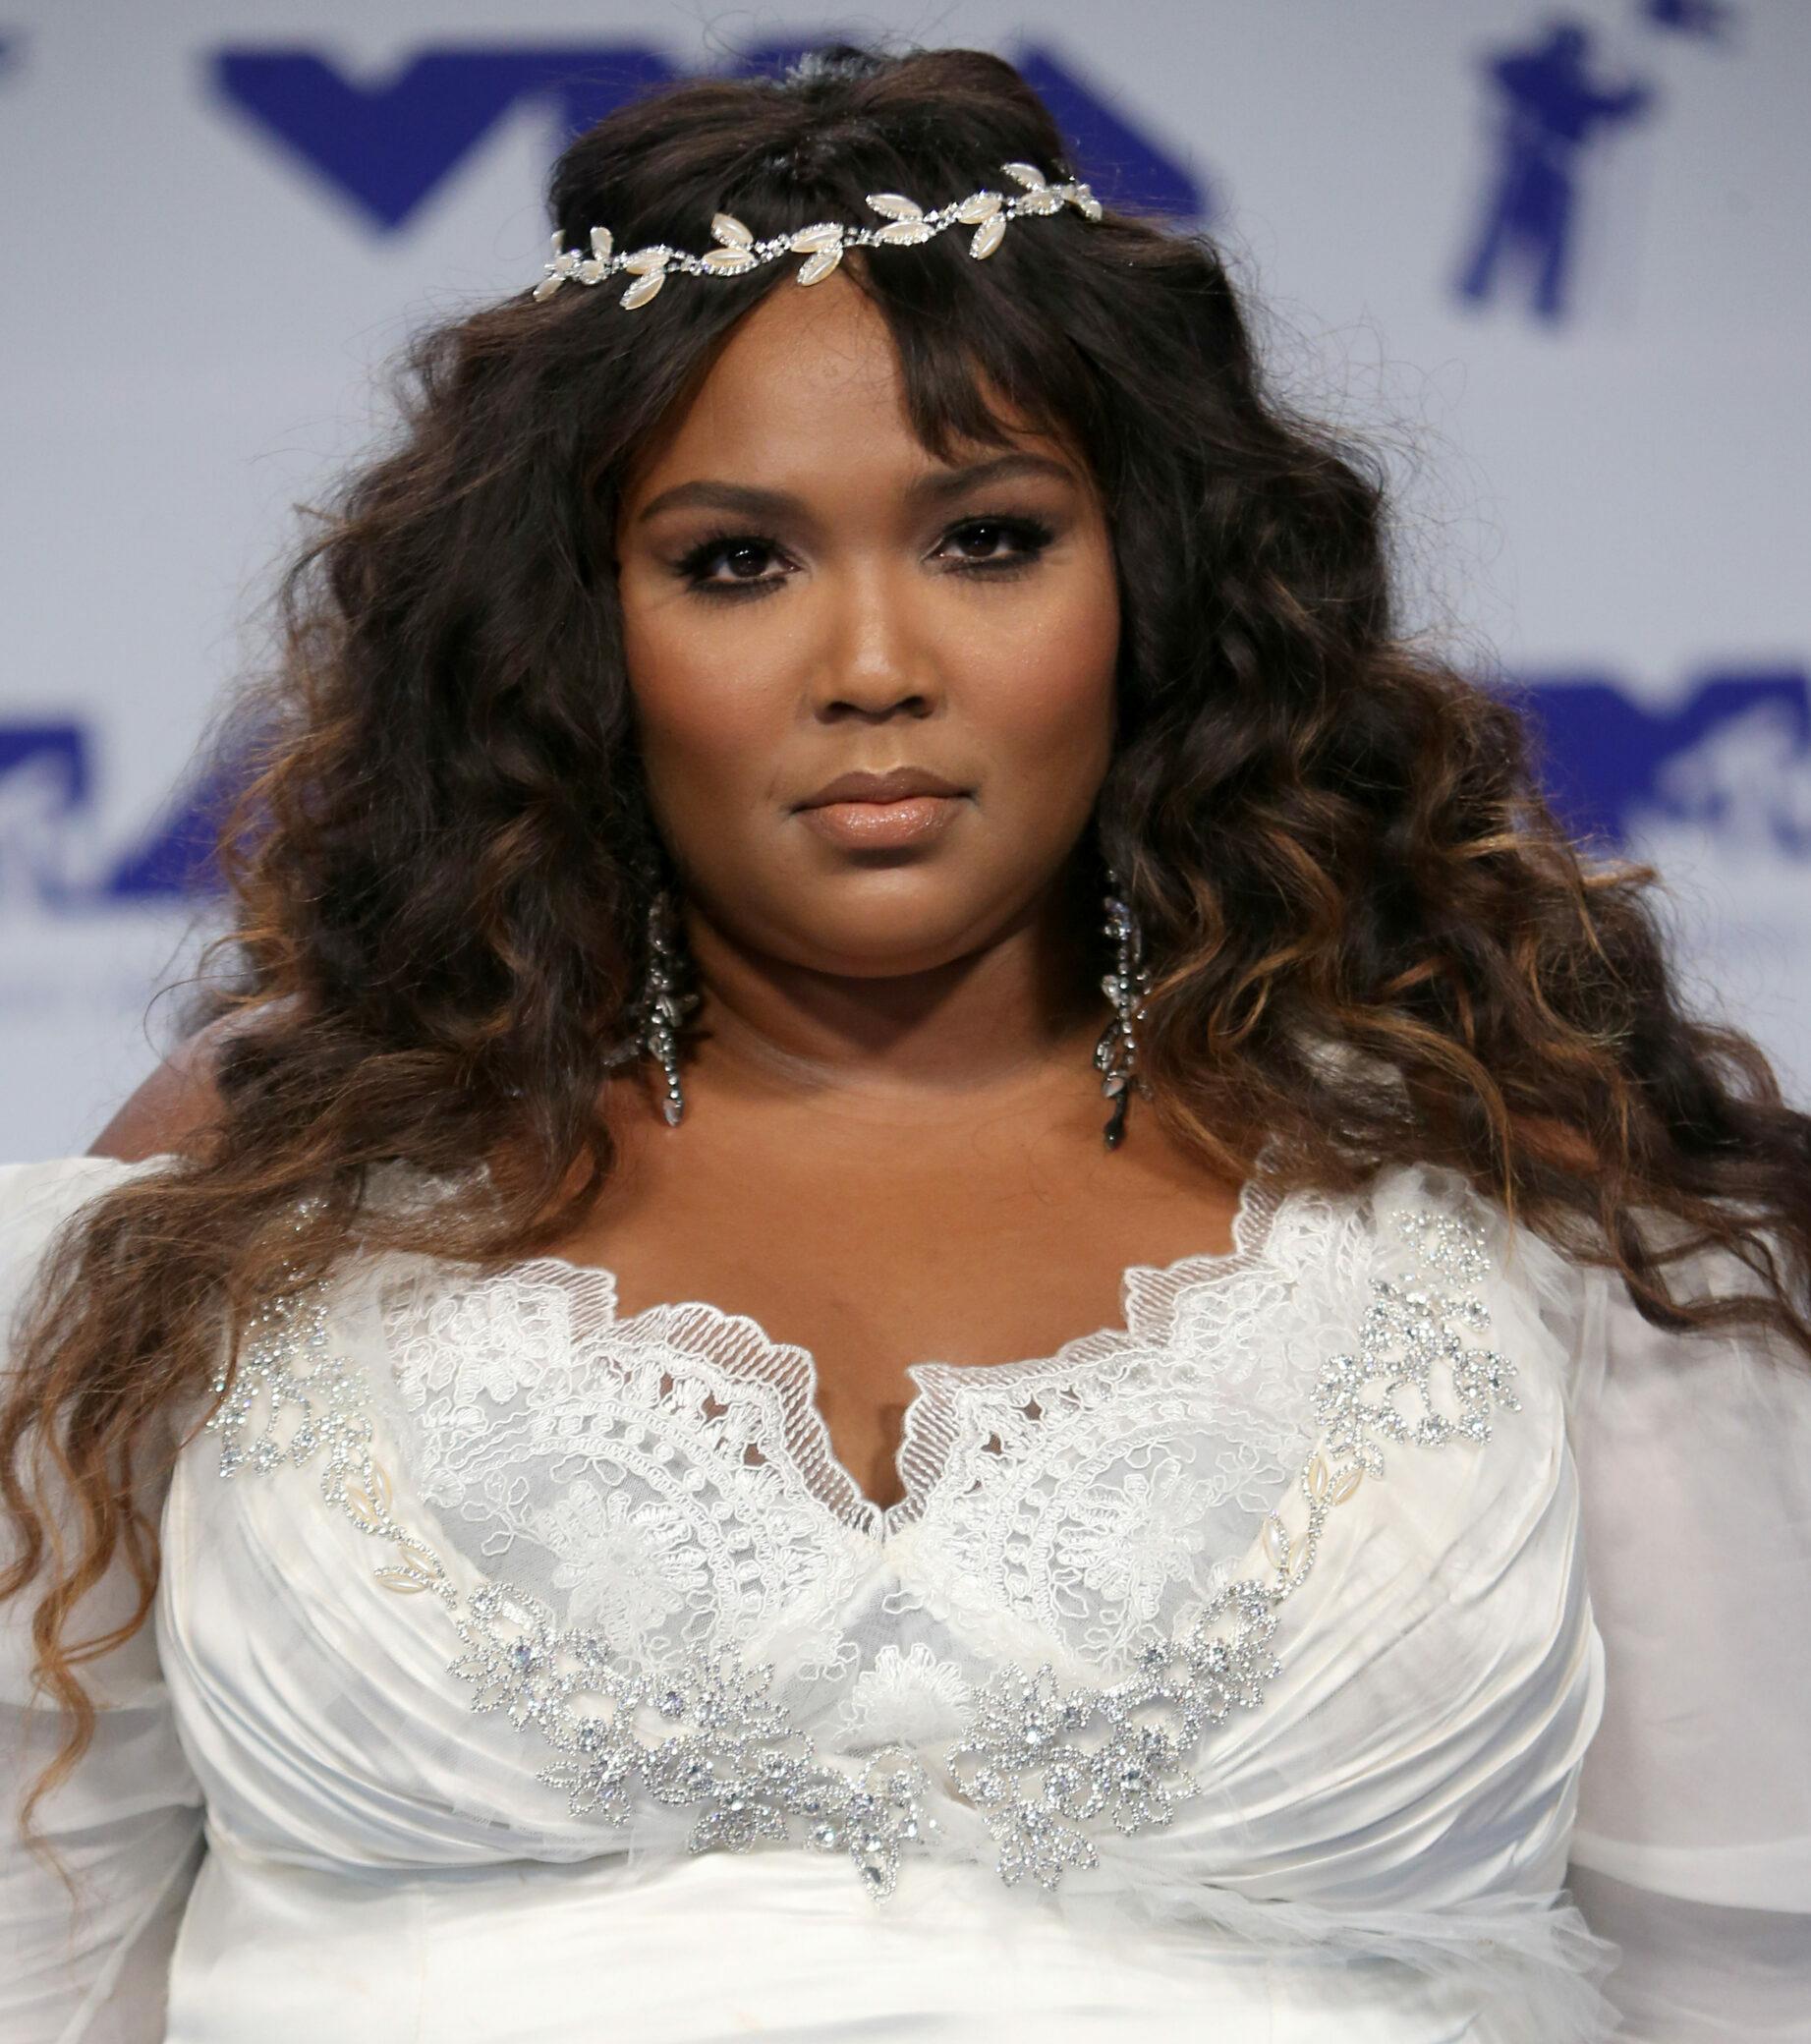 Lizzo Launches 'Radically Different' Shapewear With Bold Tattoo On Booty